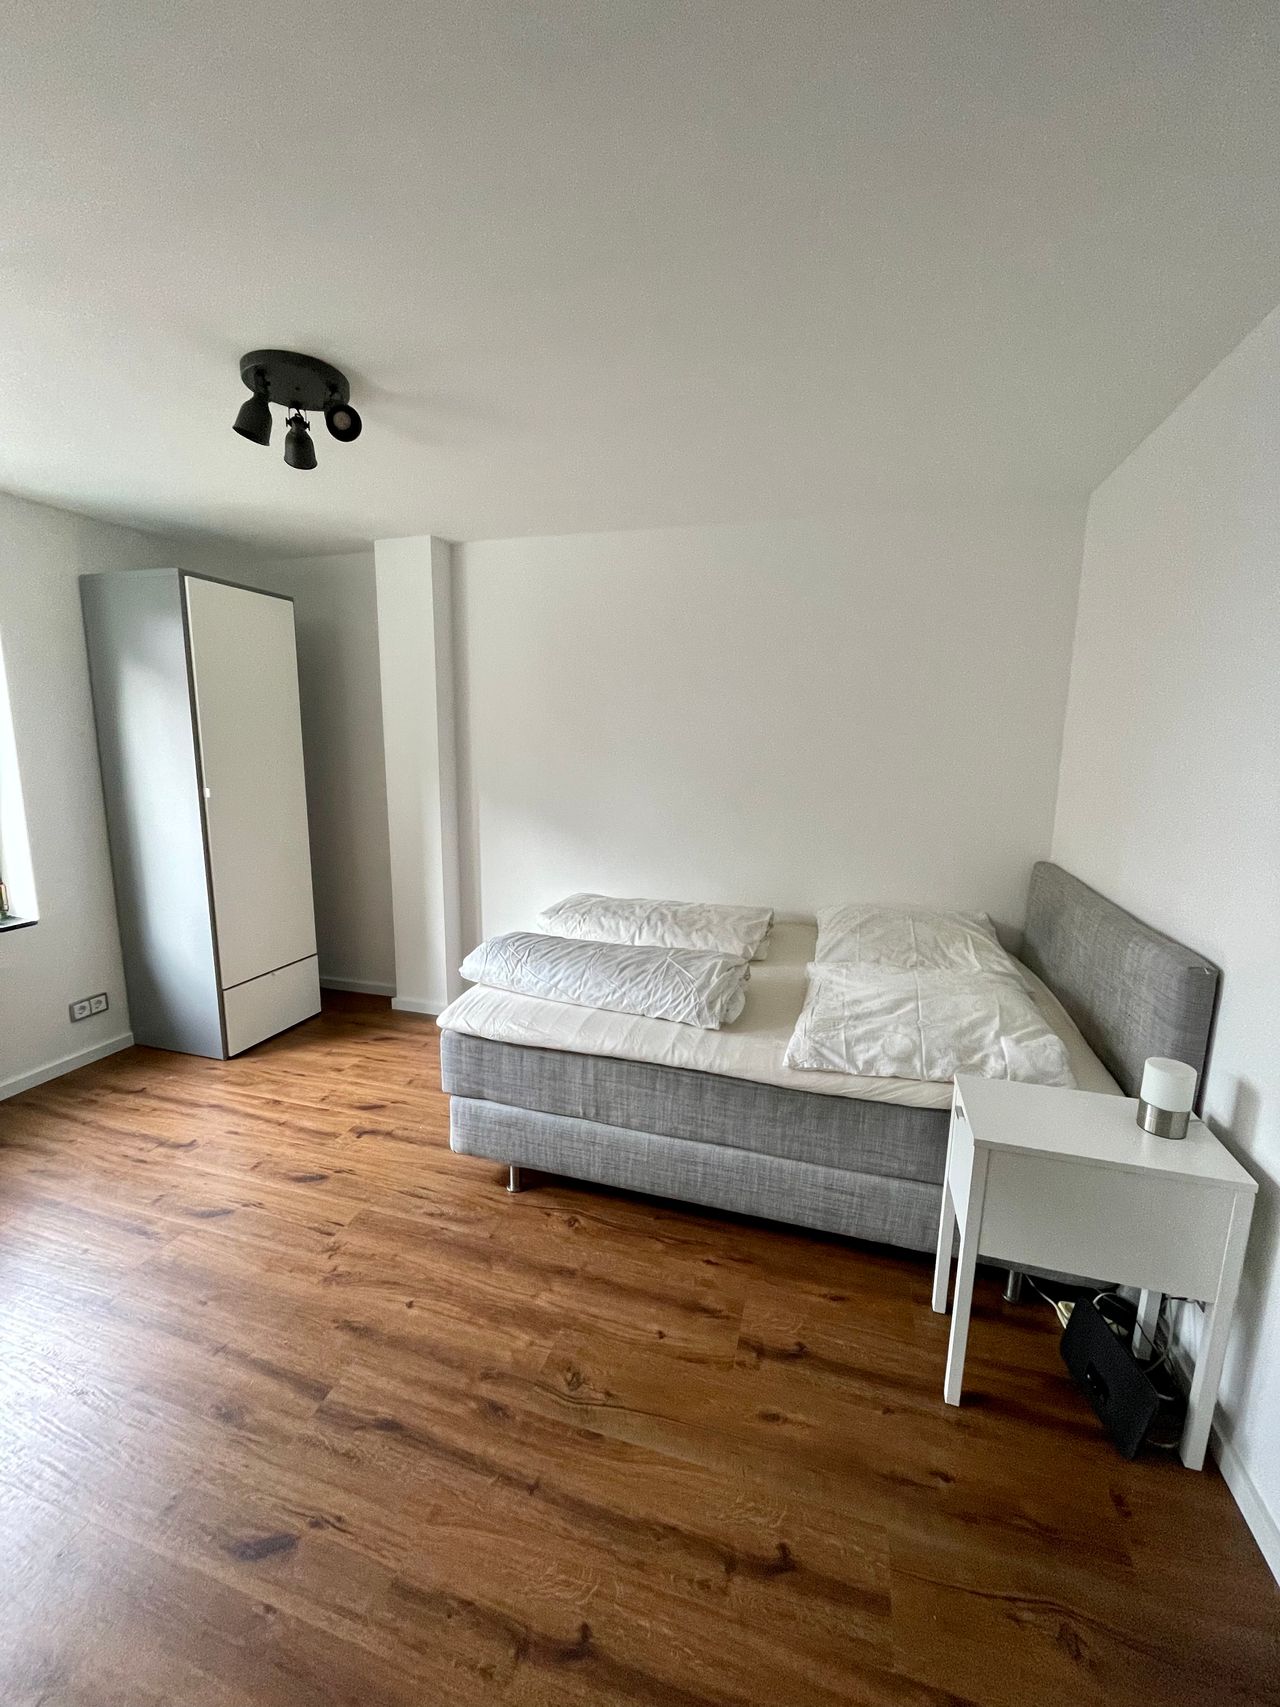 Great, cozy and modern apartment in city center | Friesenplatz I Köln I Cologne